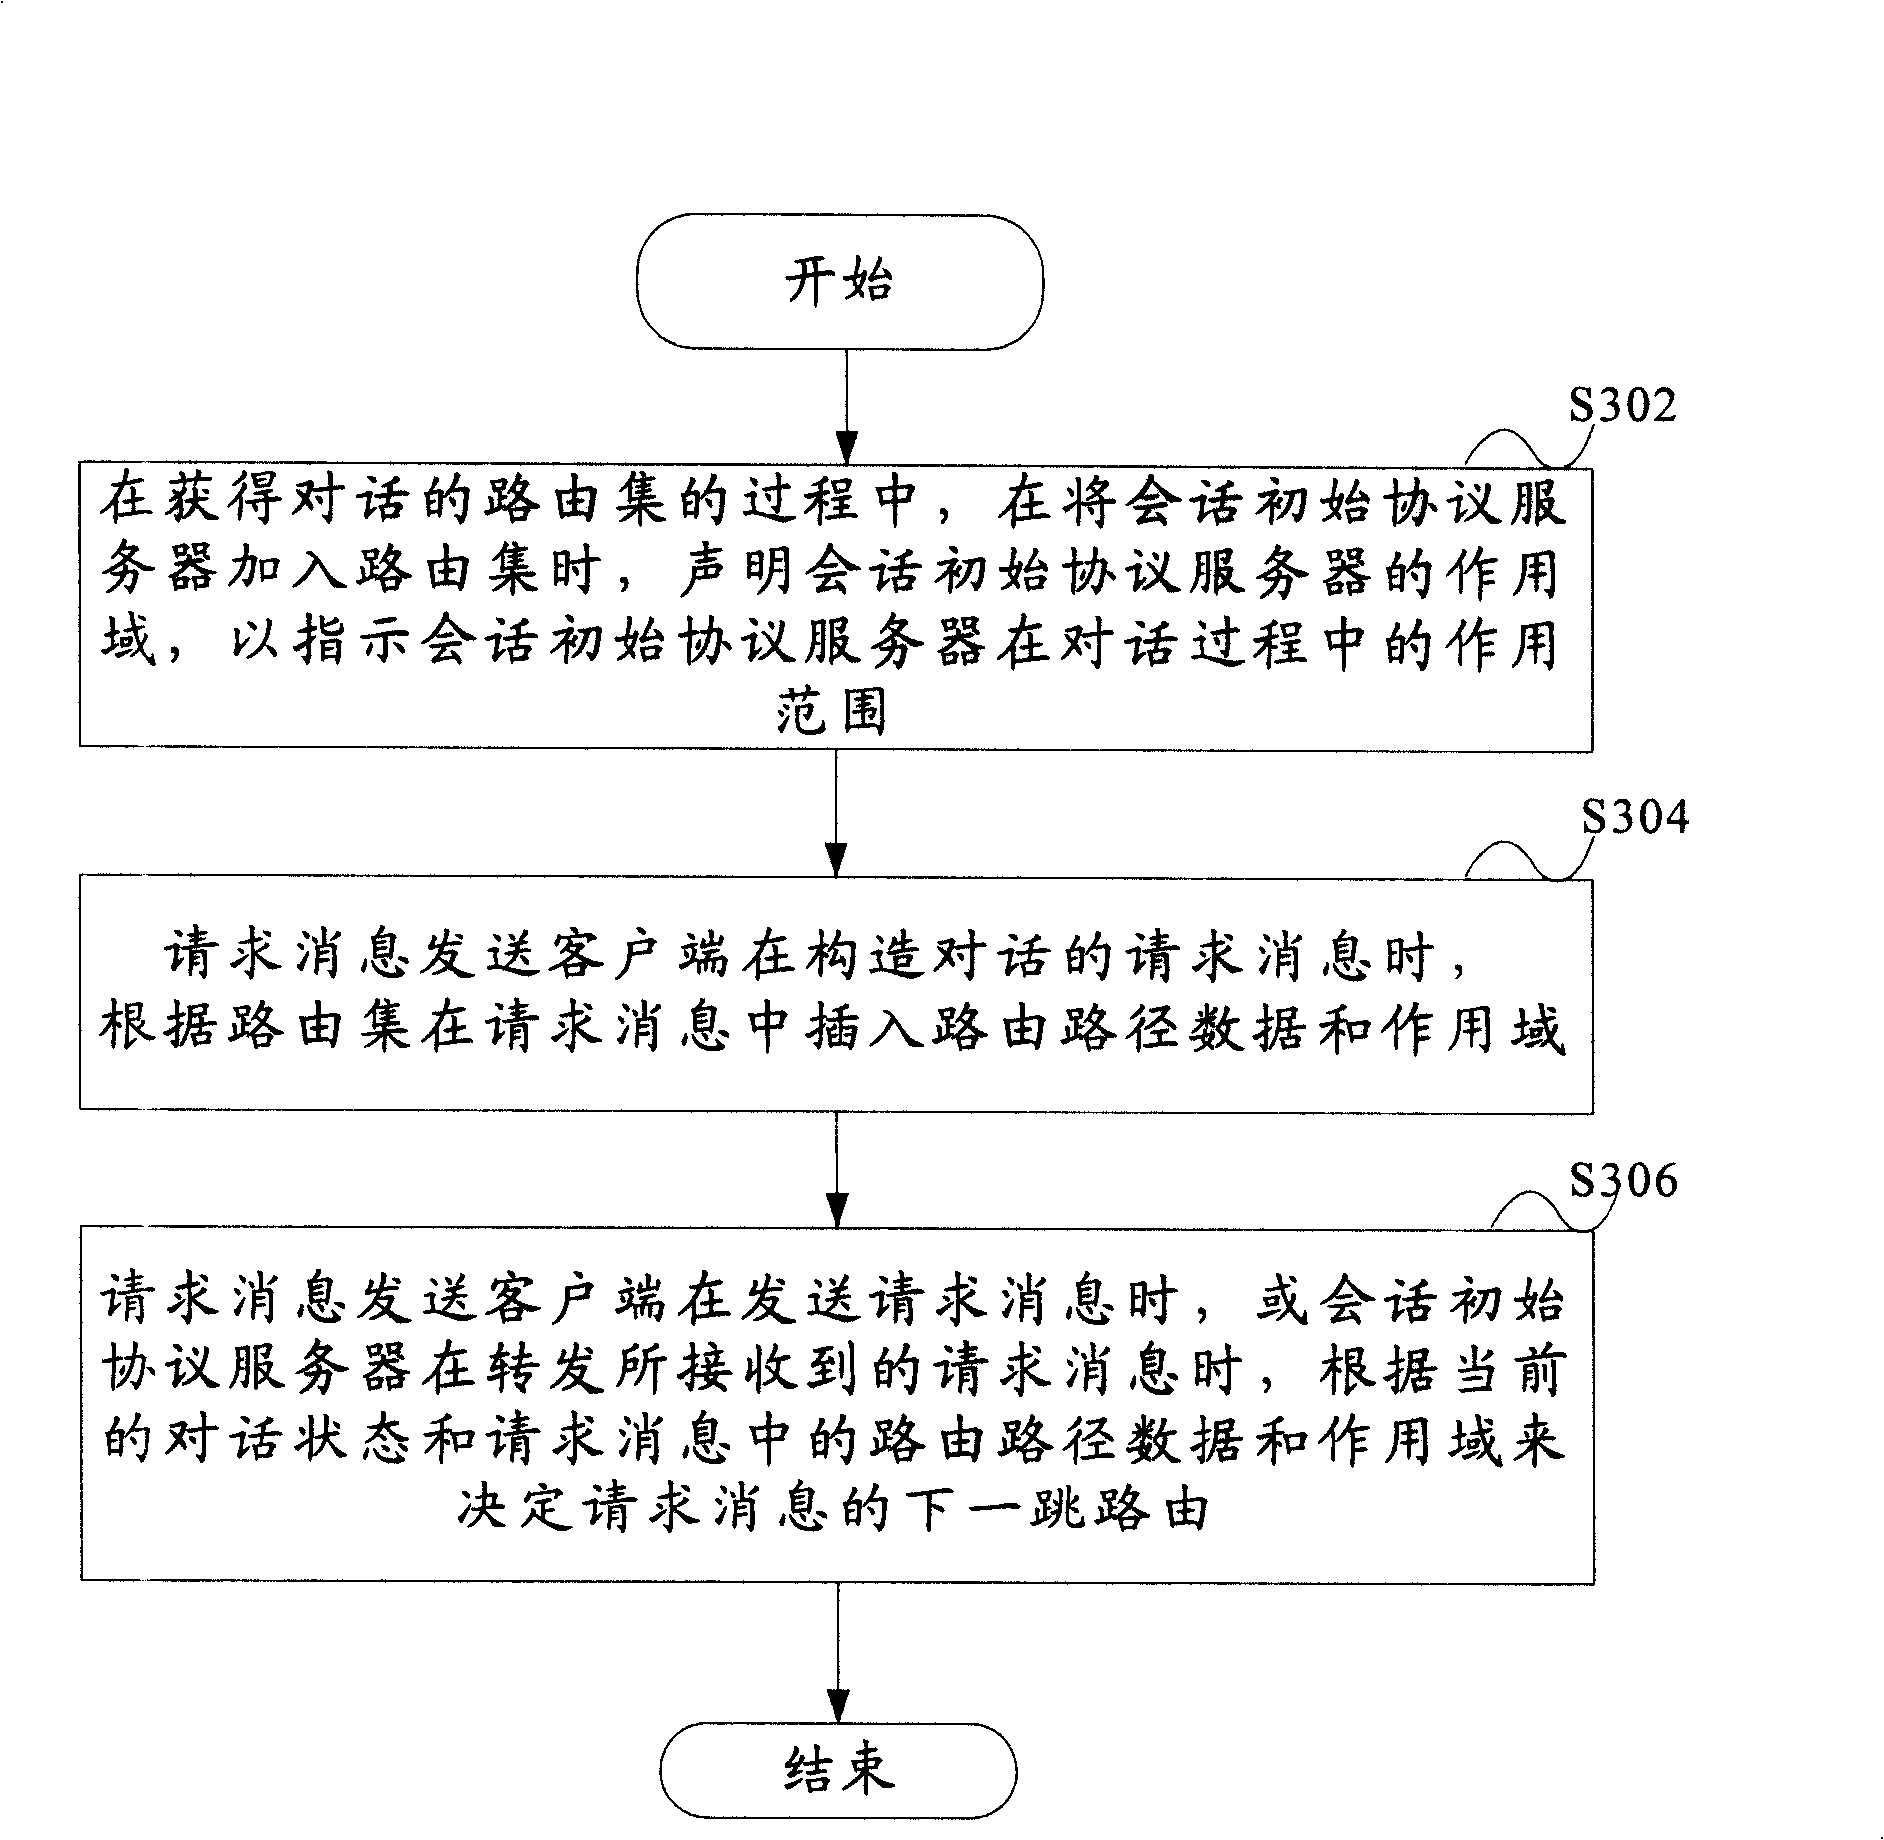 Route optimization method for session initialization protocol